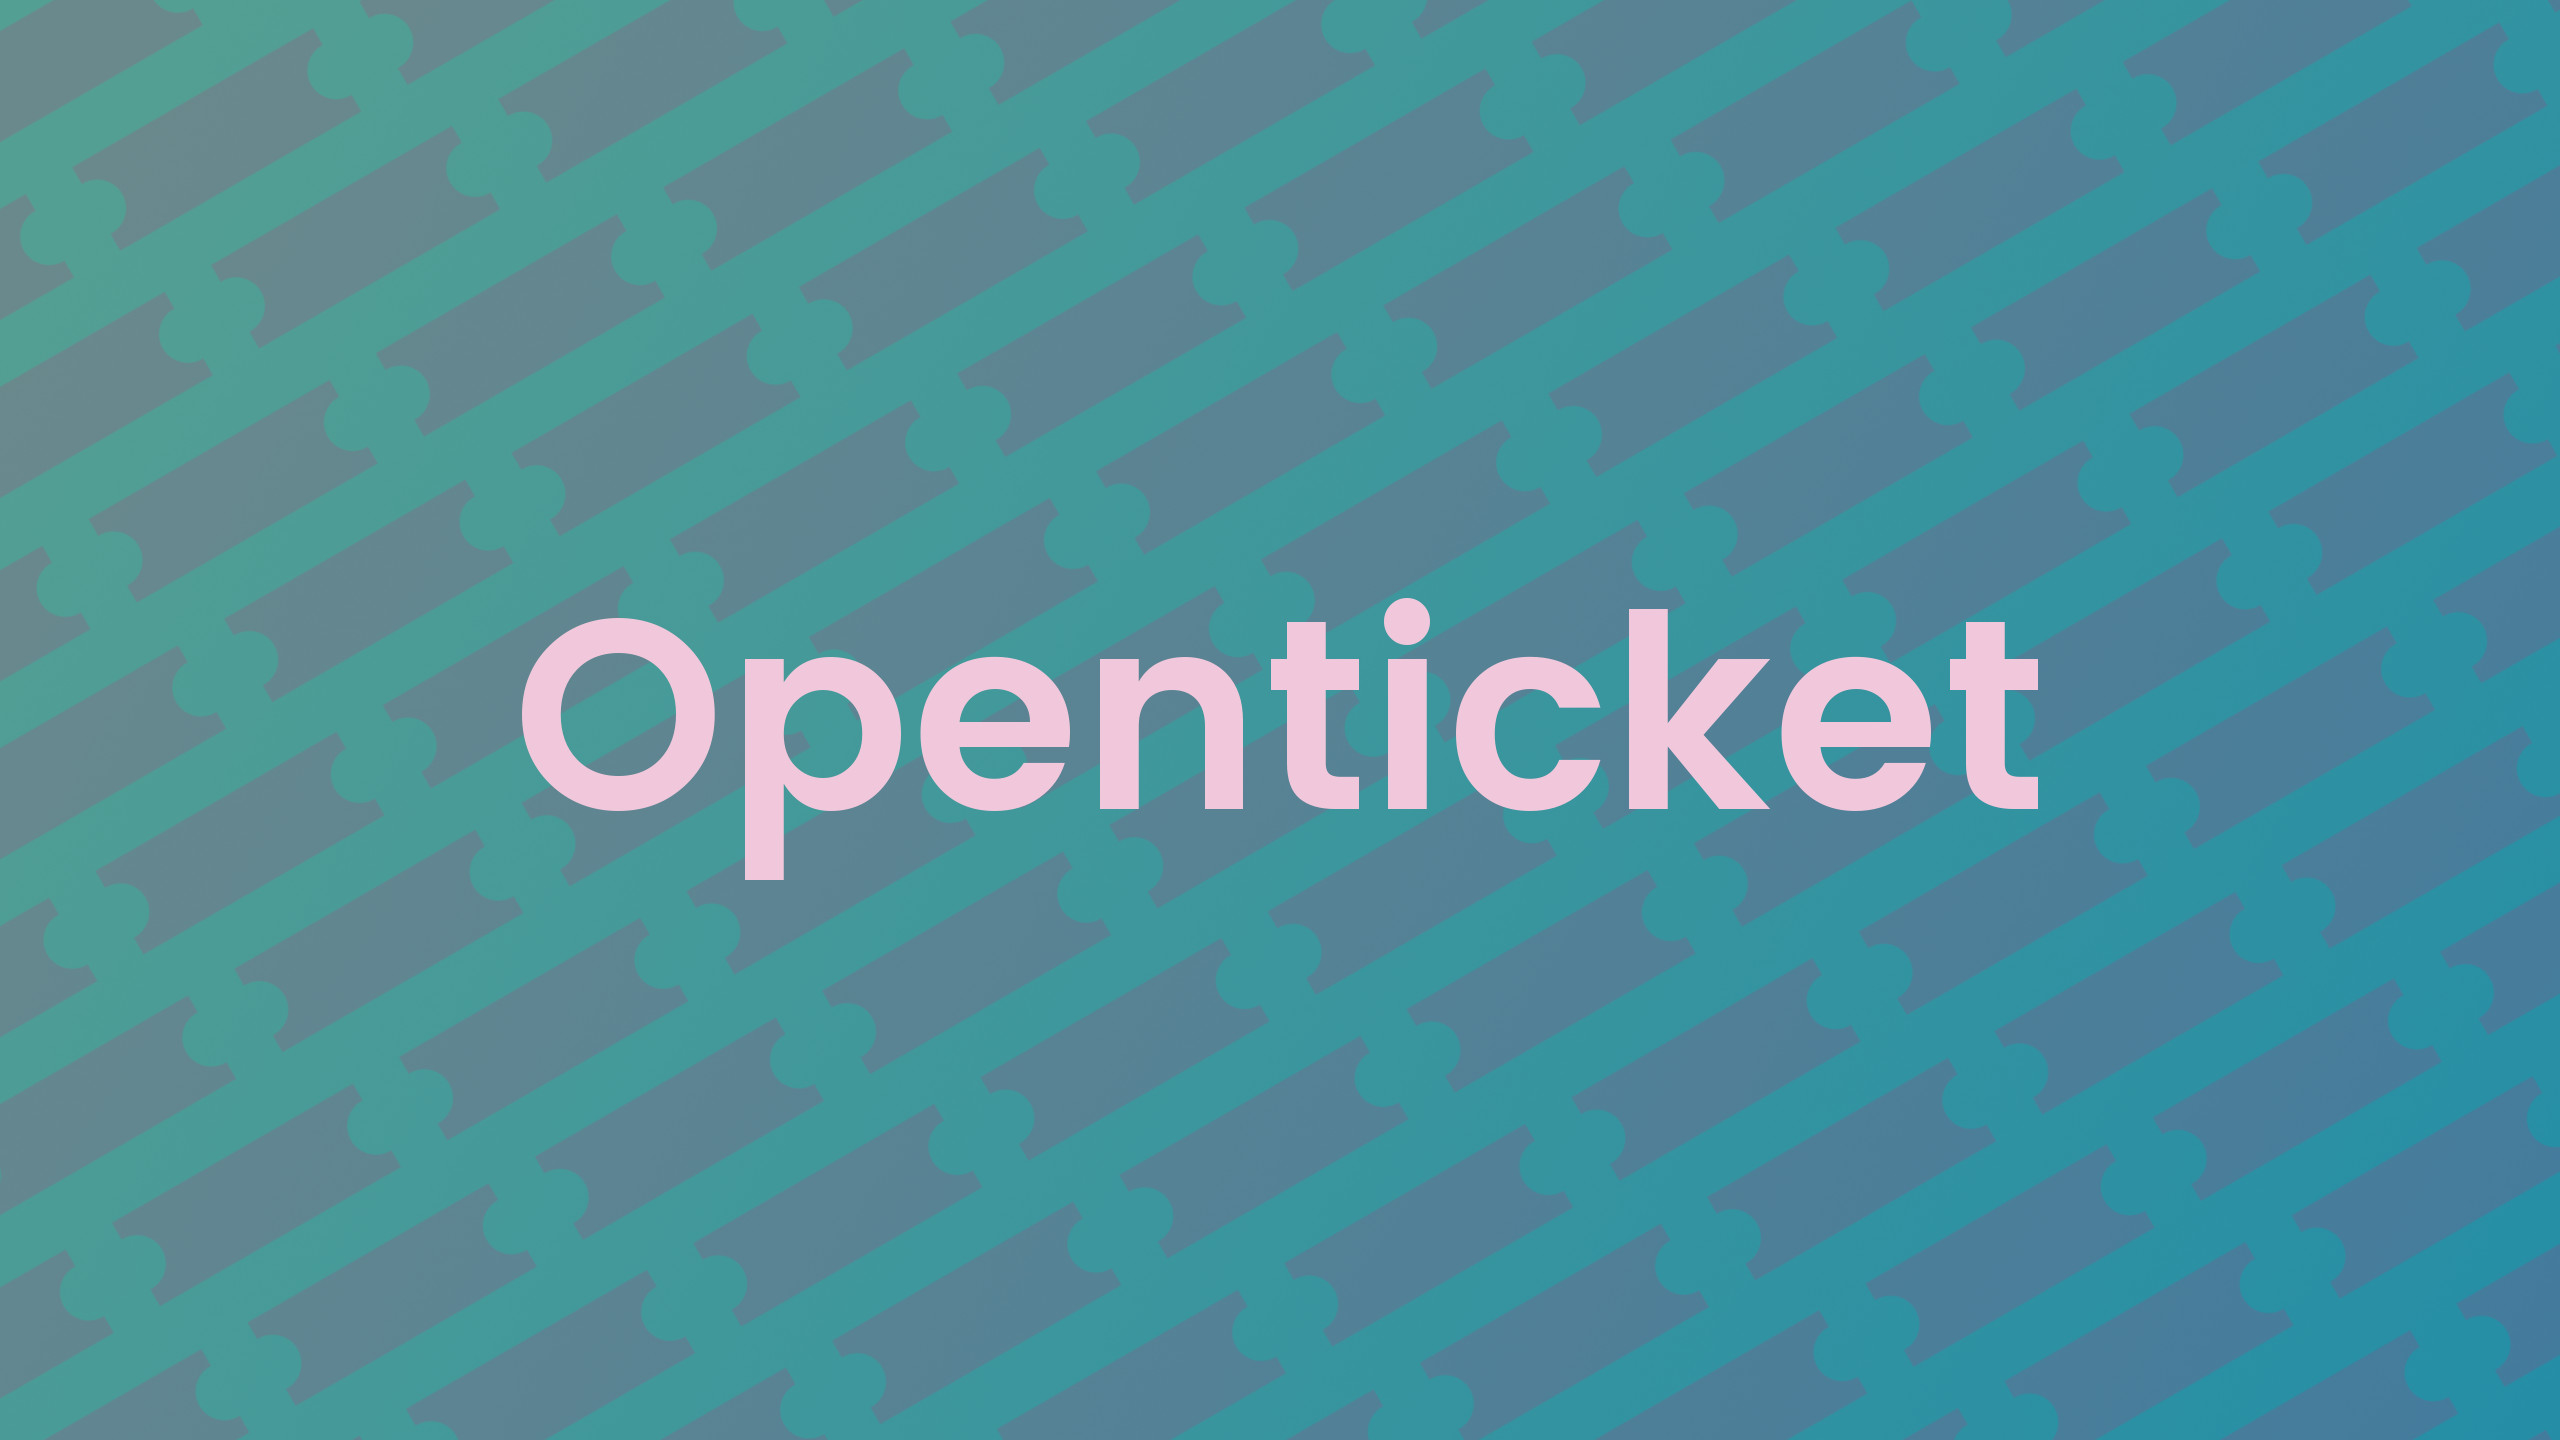 Image showing the Openticket project